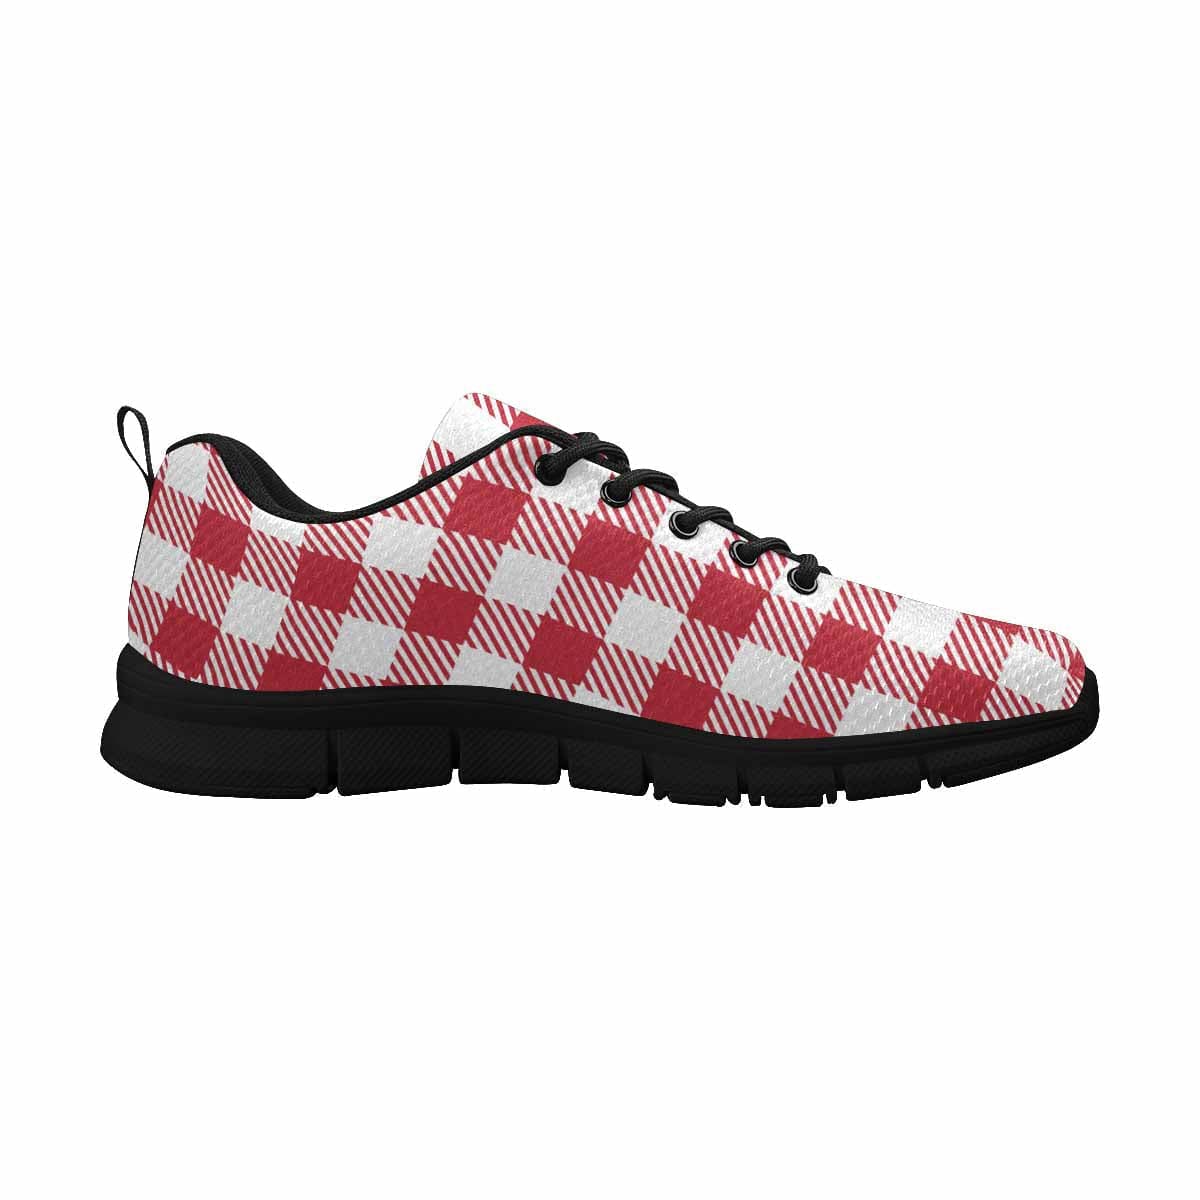 Sneakers For Men Buffalo Plaid Red And White Running Shoes Dg862 - Mens